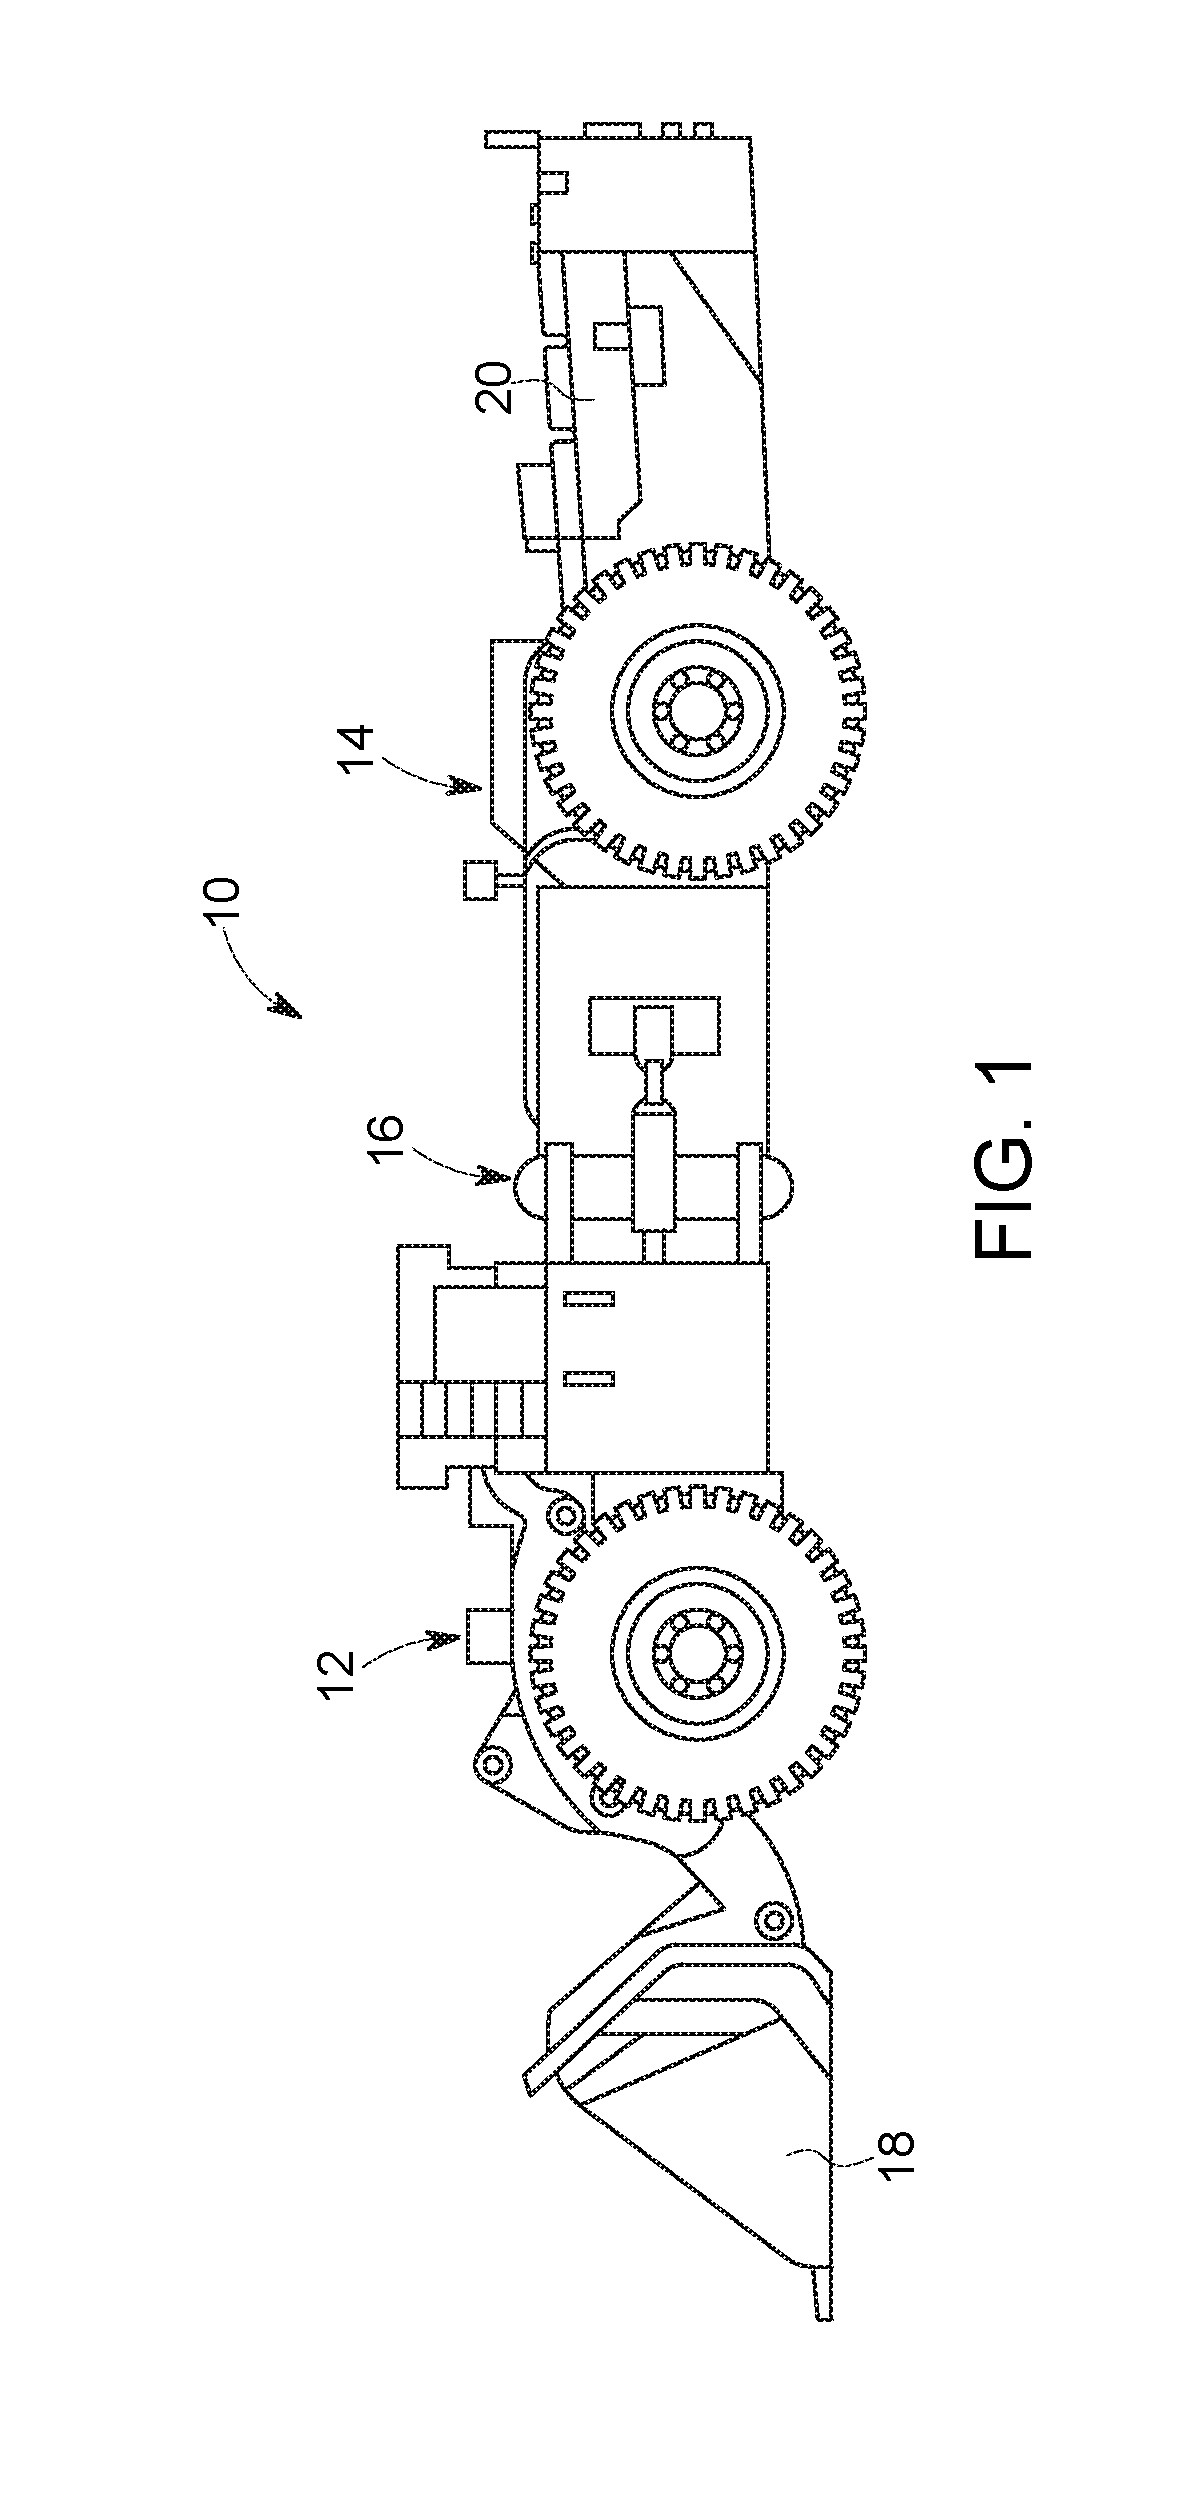 System and method for controlling a vehicle